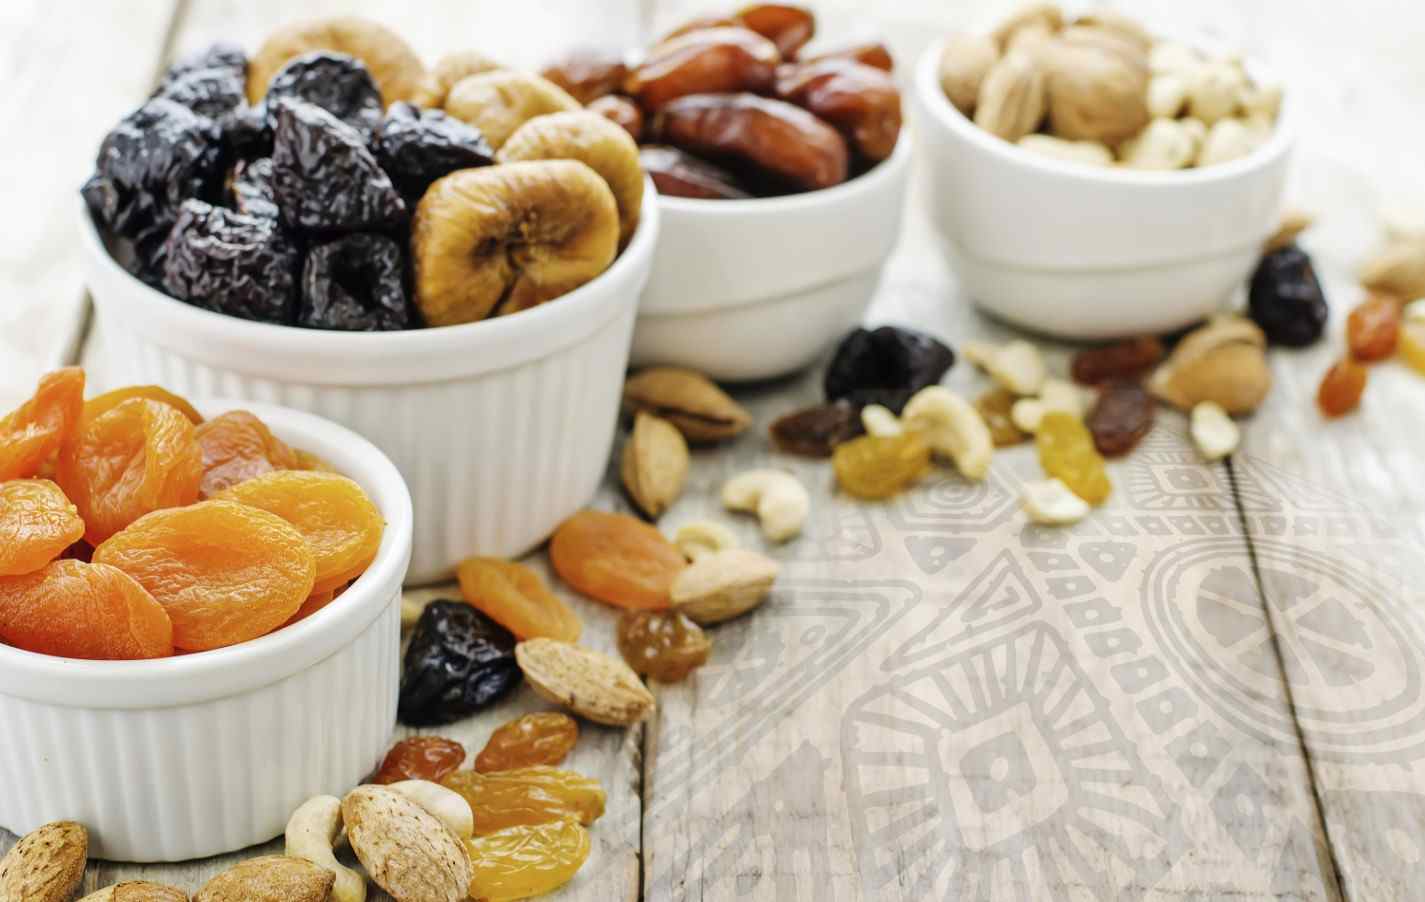 Middle East and Europe, the main market for exporting dried fruit